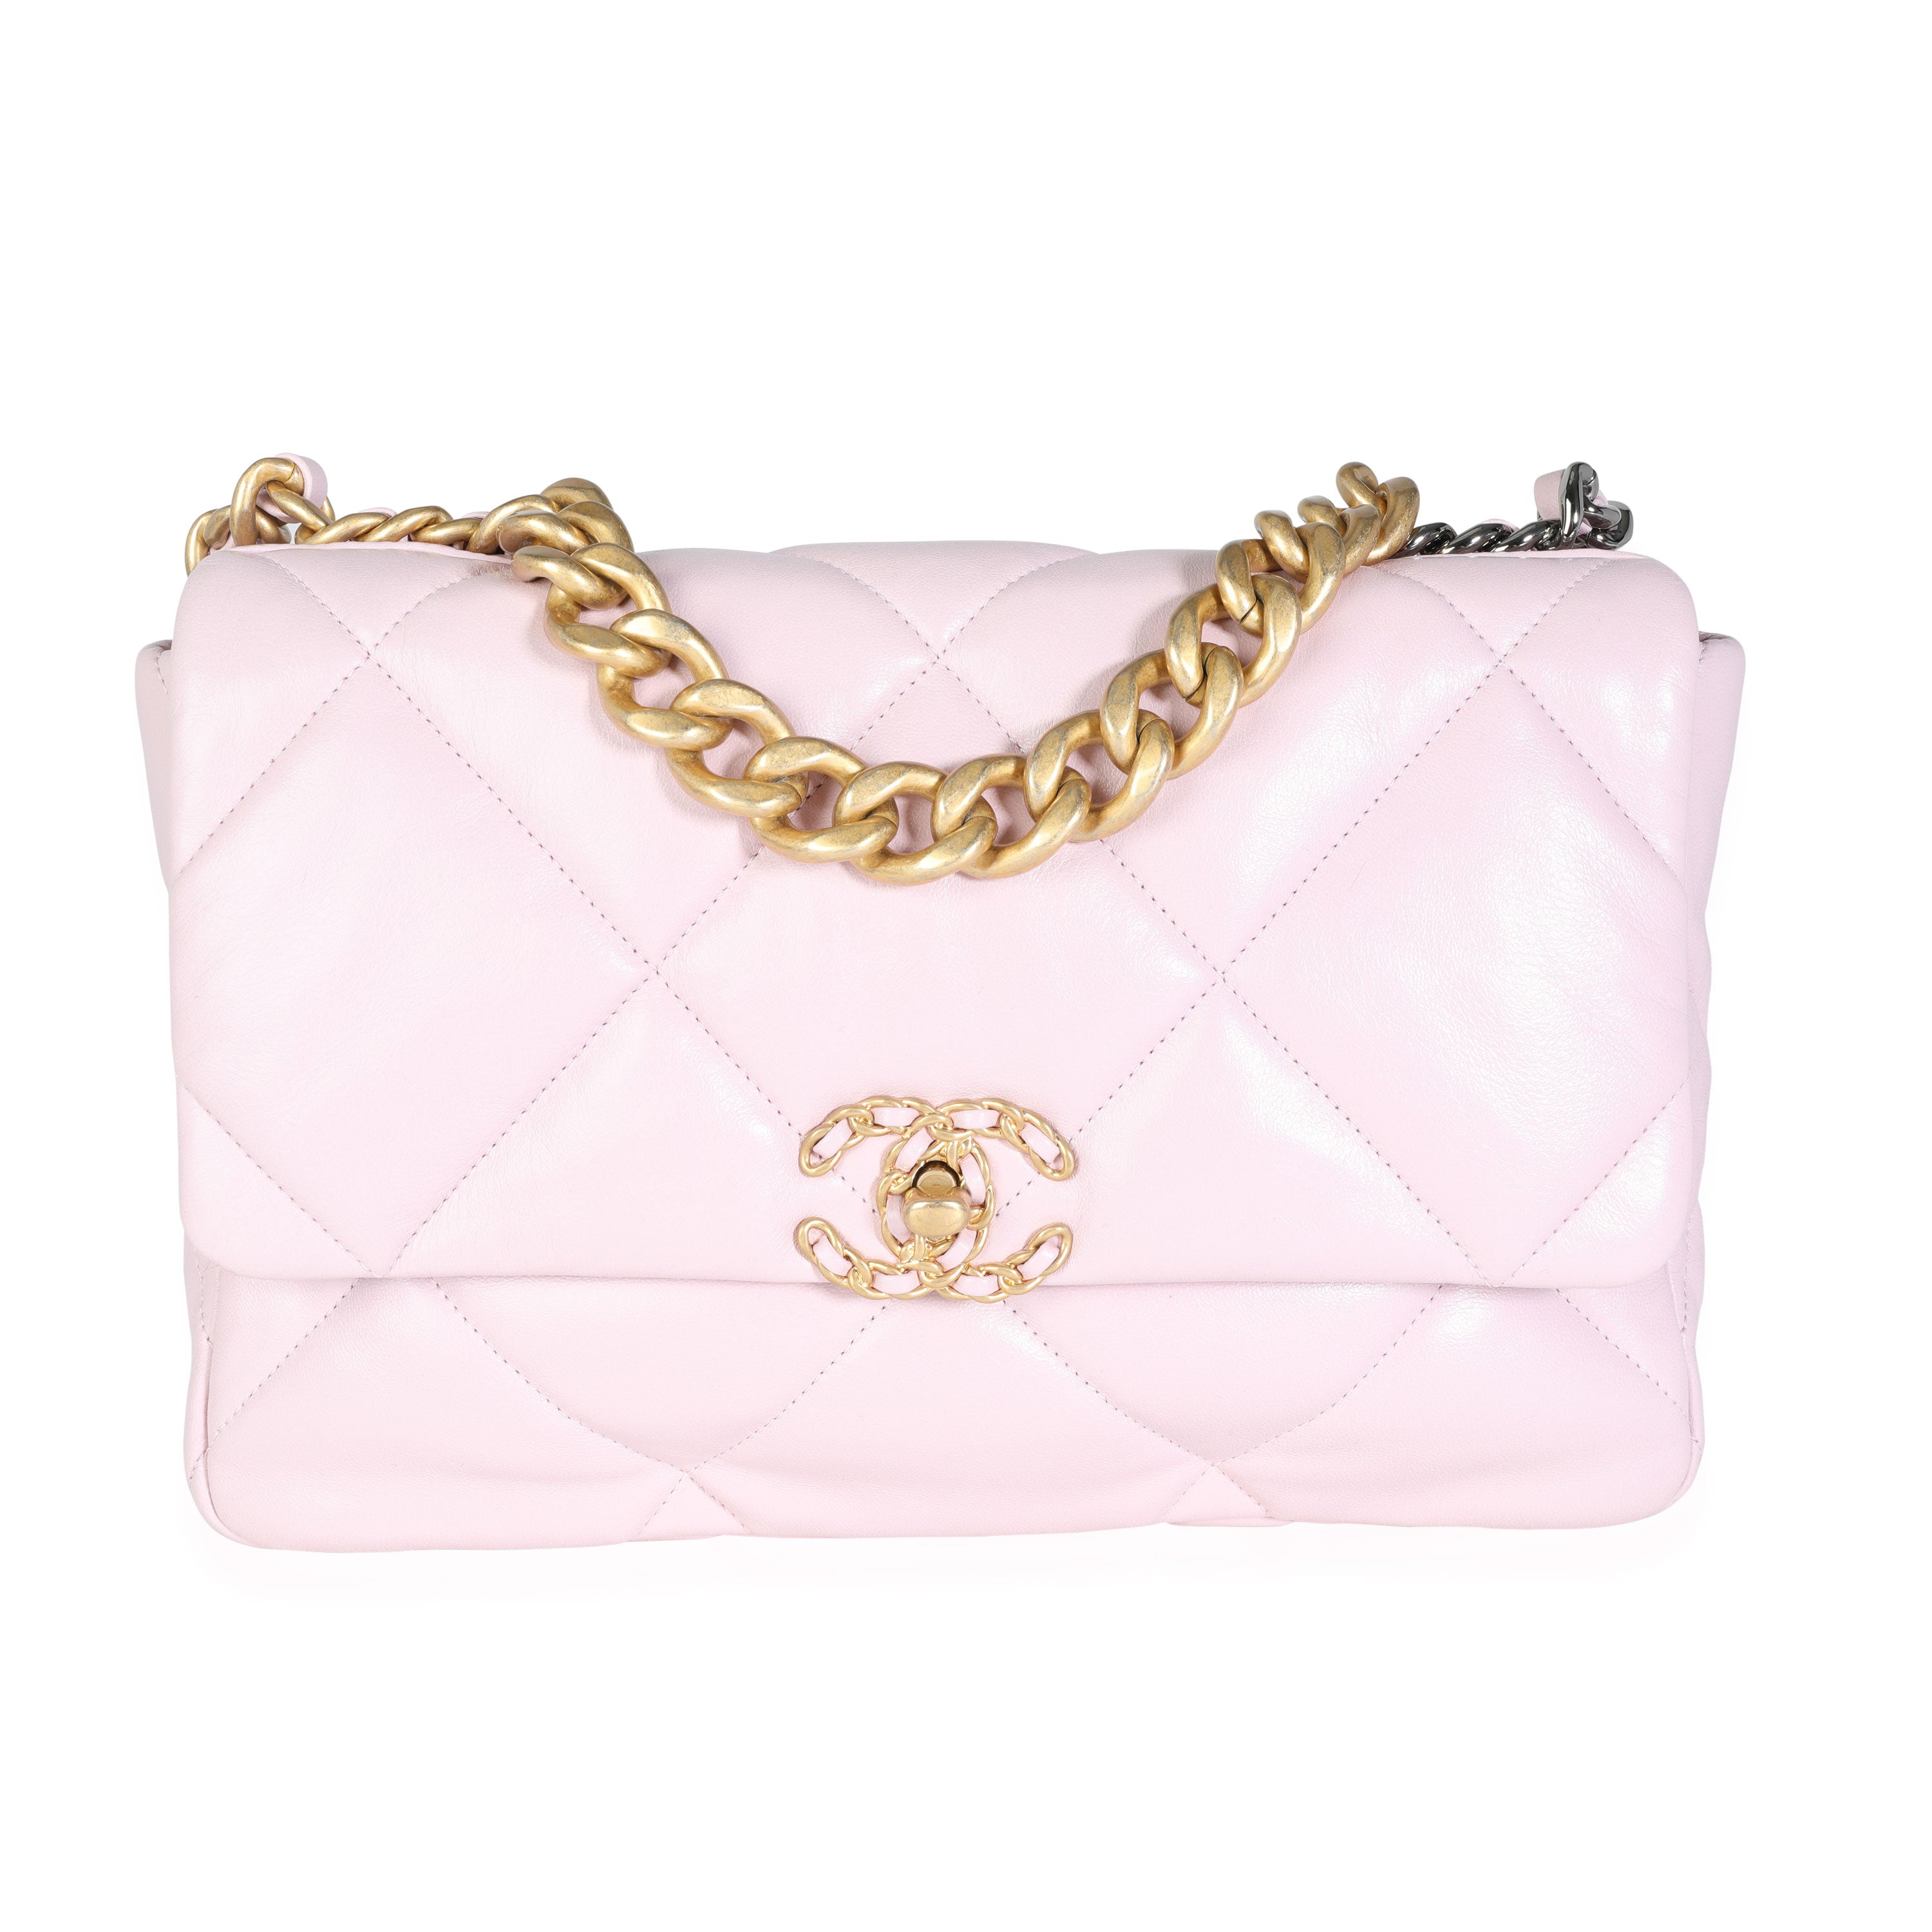 Chanel Light Pink Quilted Lambskin Large Chanel 19 Bag, myGemma, DE